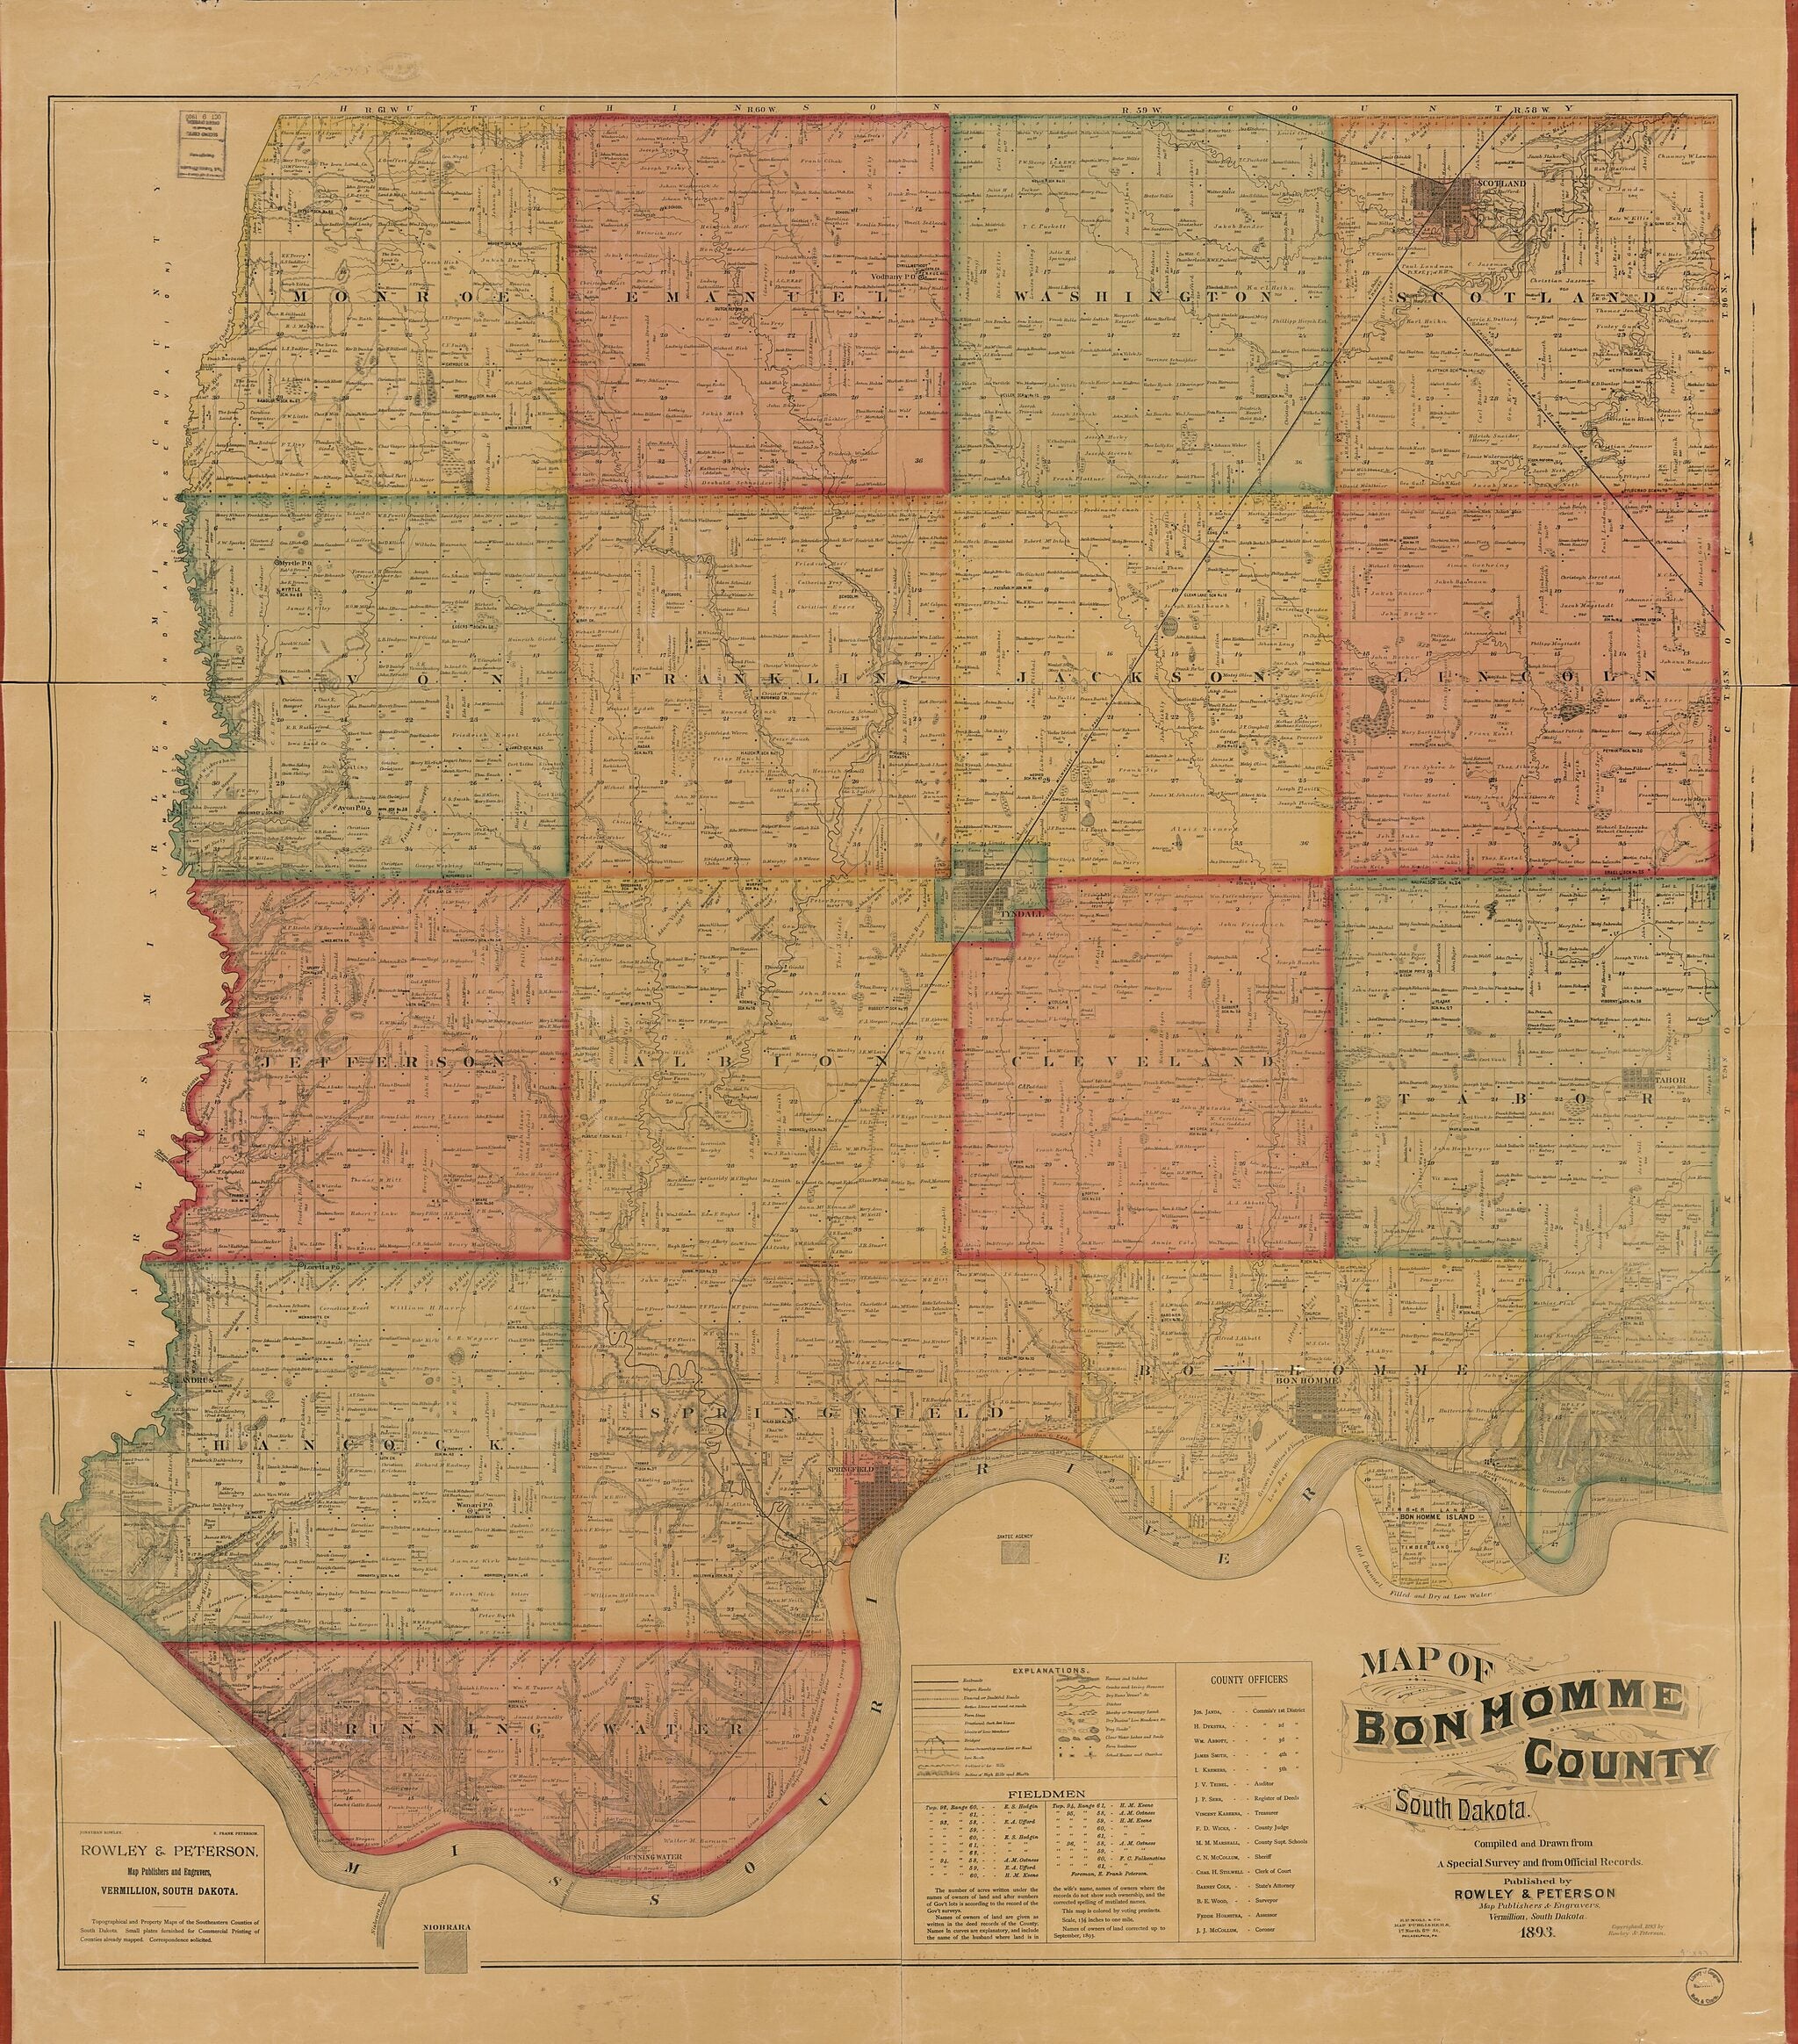 This old map of Map of Bon Homme County, South Dakota : Compiled and Drawn from a Special Survey and from Official Records from 1893 was created by  E.P. Noll &amp; Co,  Rowley &amp; Peterson in 1893